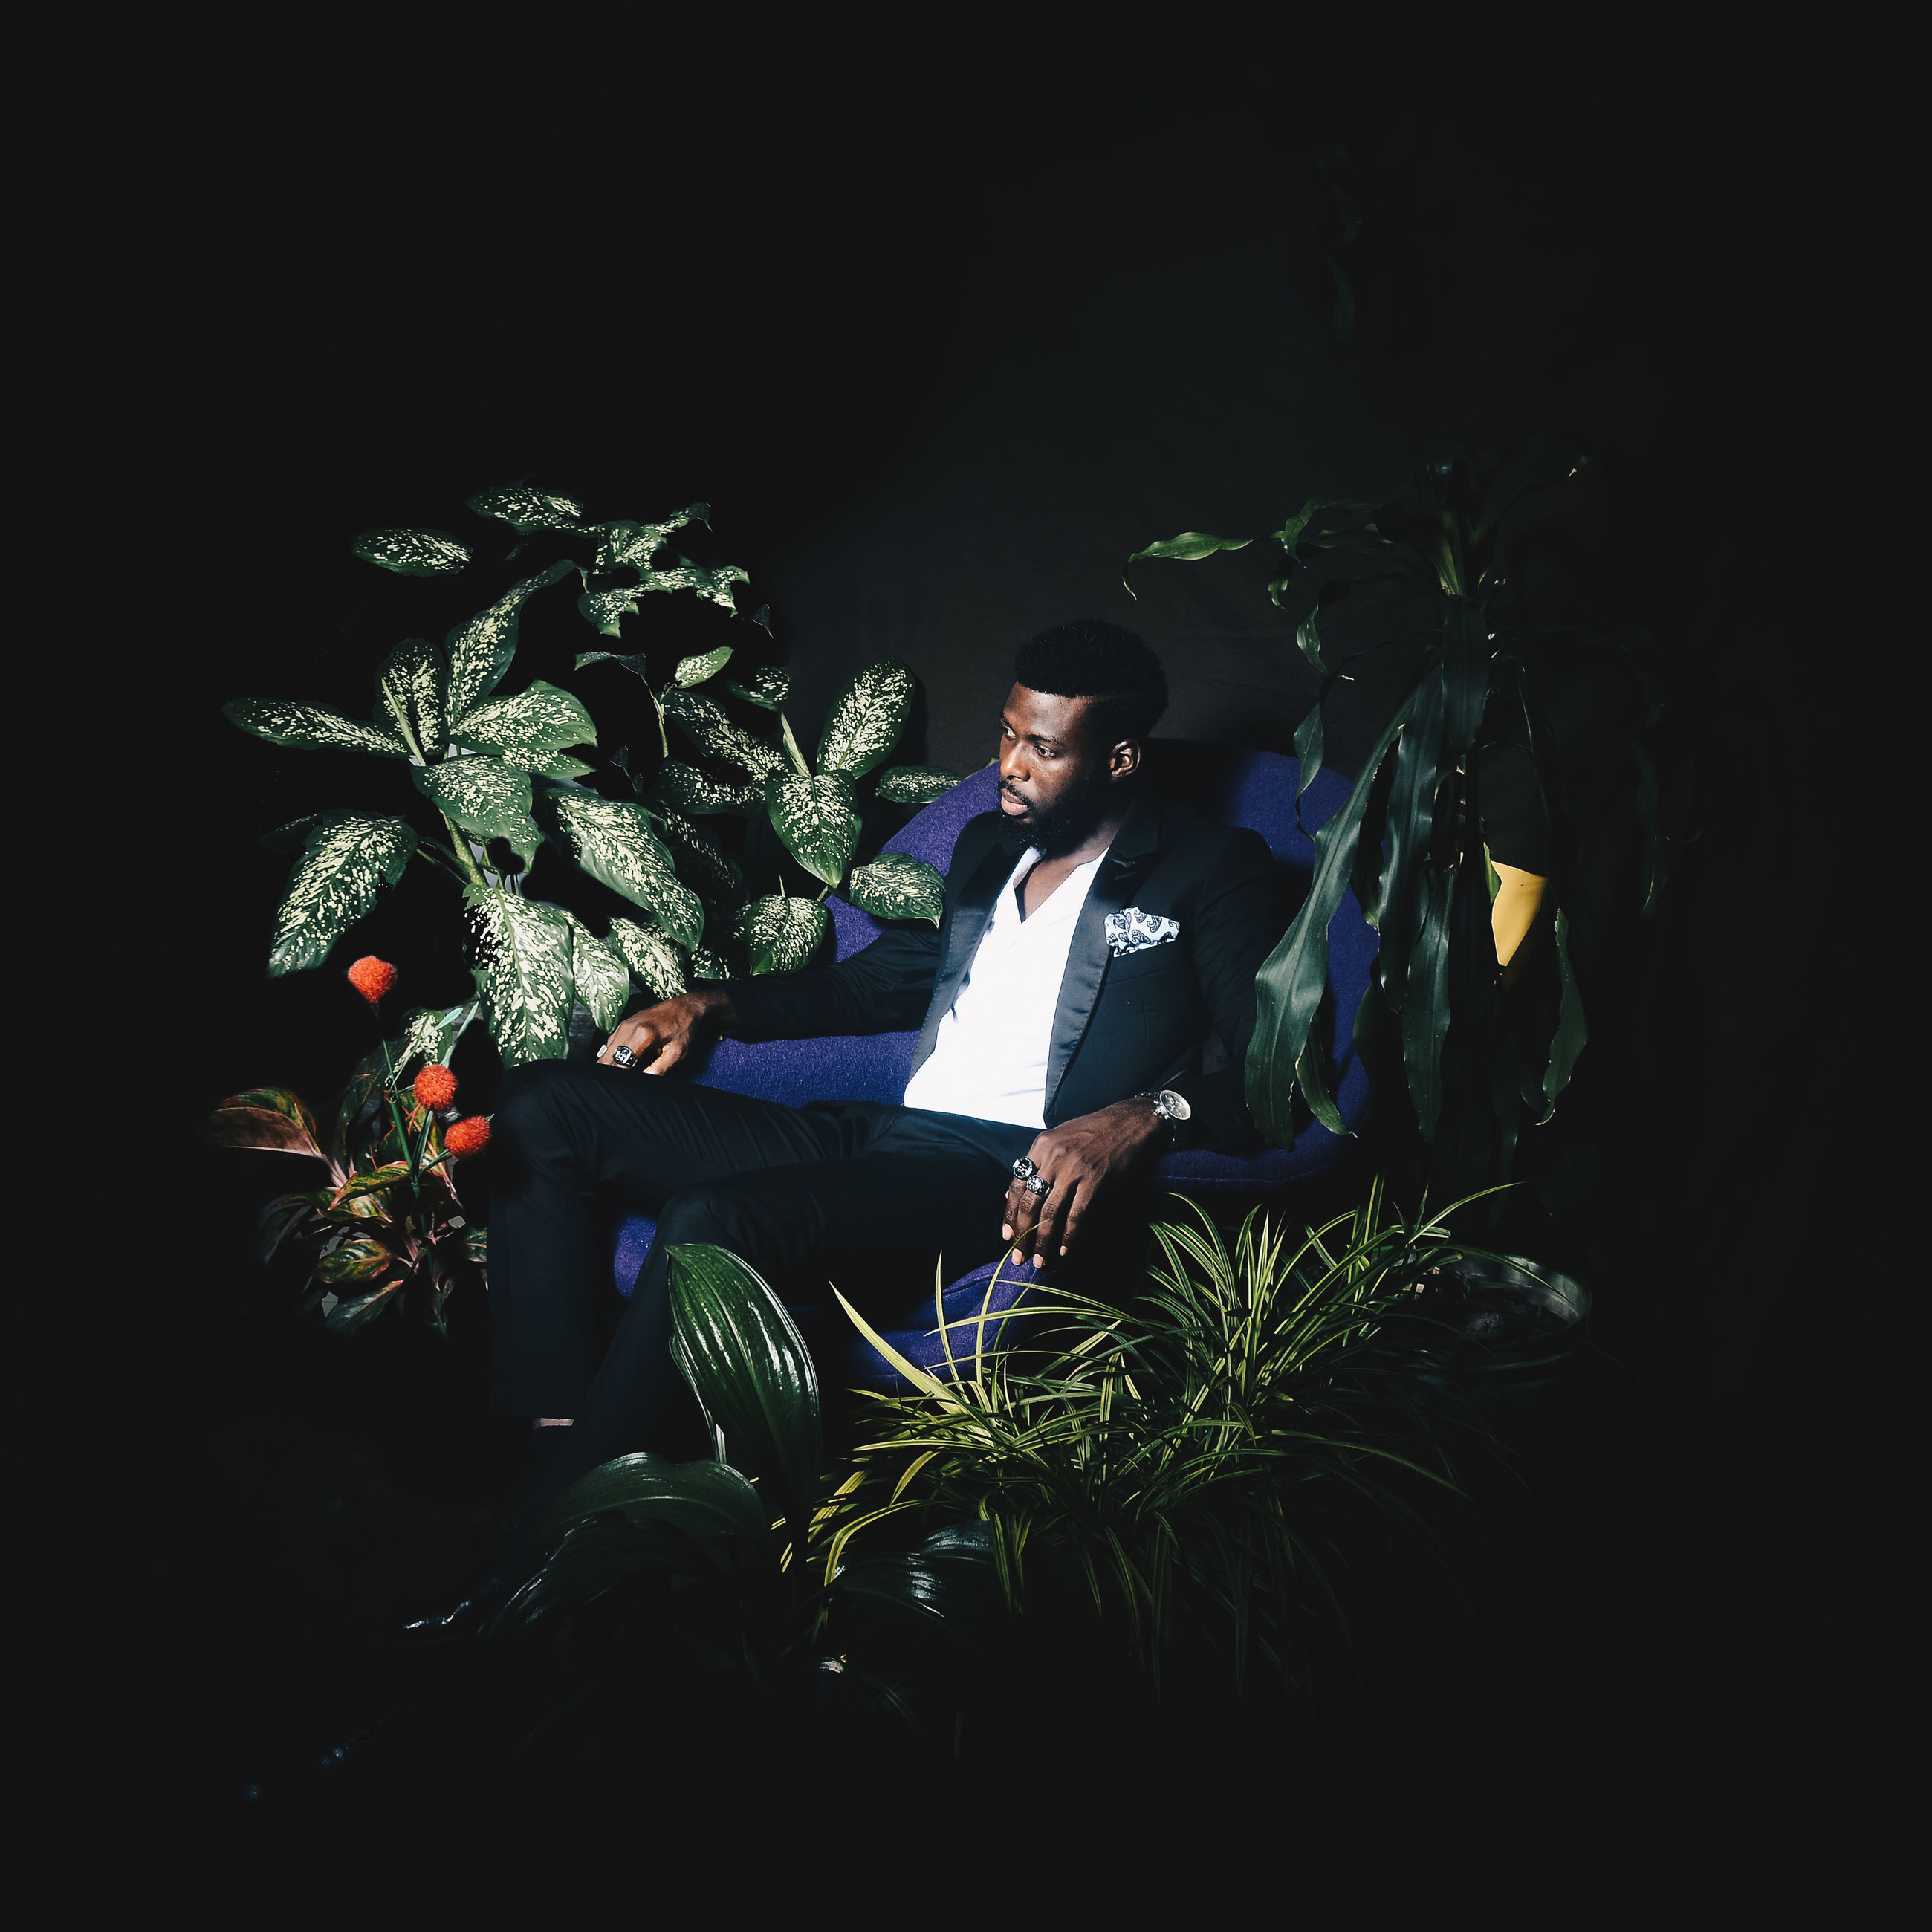 plant, one person, real people, young adult, growth, young men, nature, leaf, lifestyles, front view, full length, sitting, indoors, men, plant part, potted plant, three quarter length, leisure activity, well-dressed, black background, menswear, contemplation